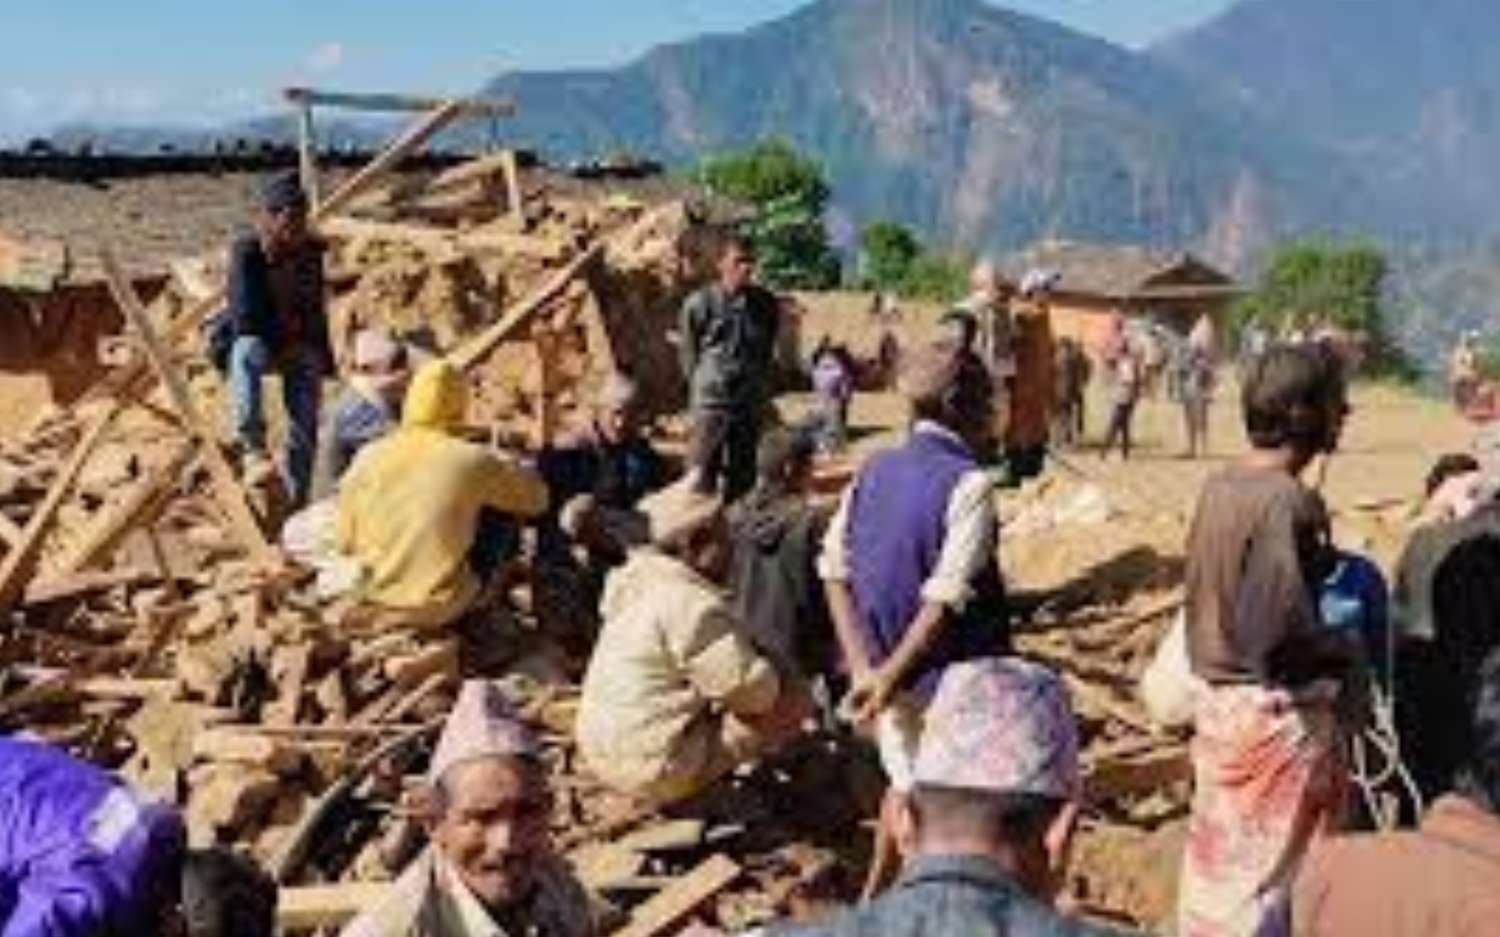 10,000 Beneficiaries Confirmed for Temporary Housing in Aathbiskot